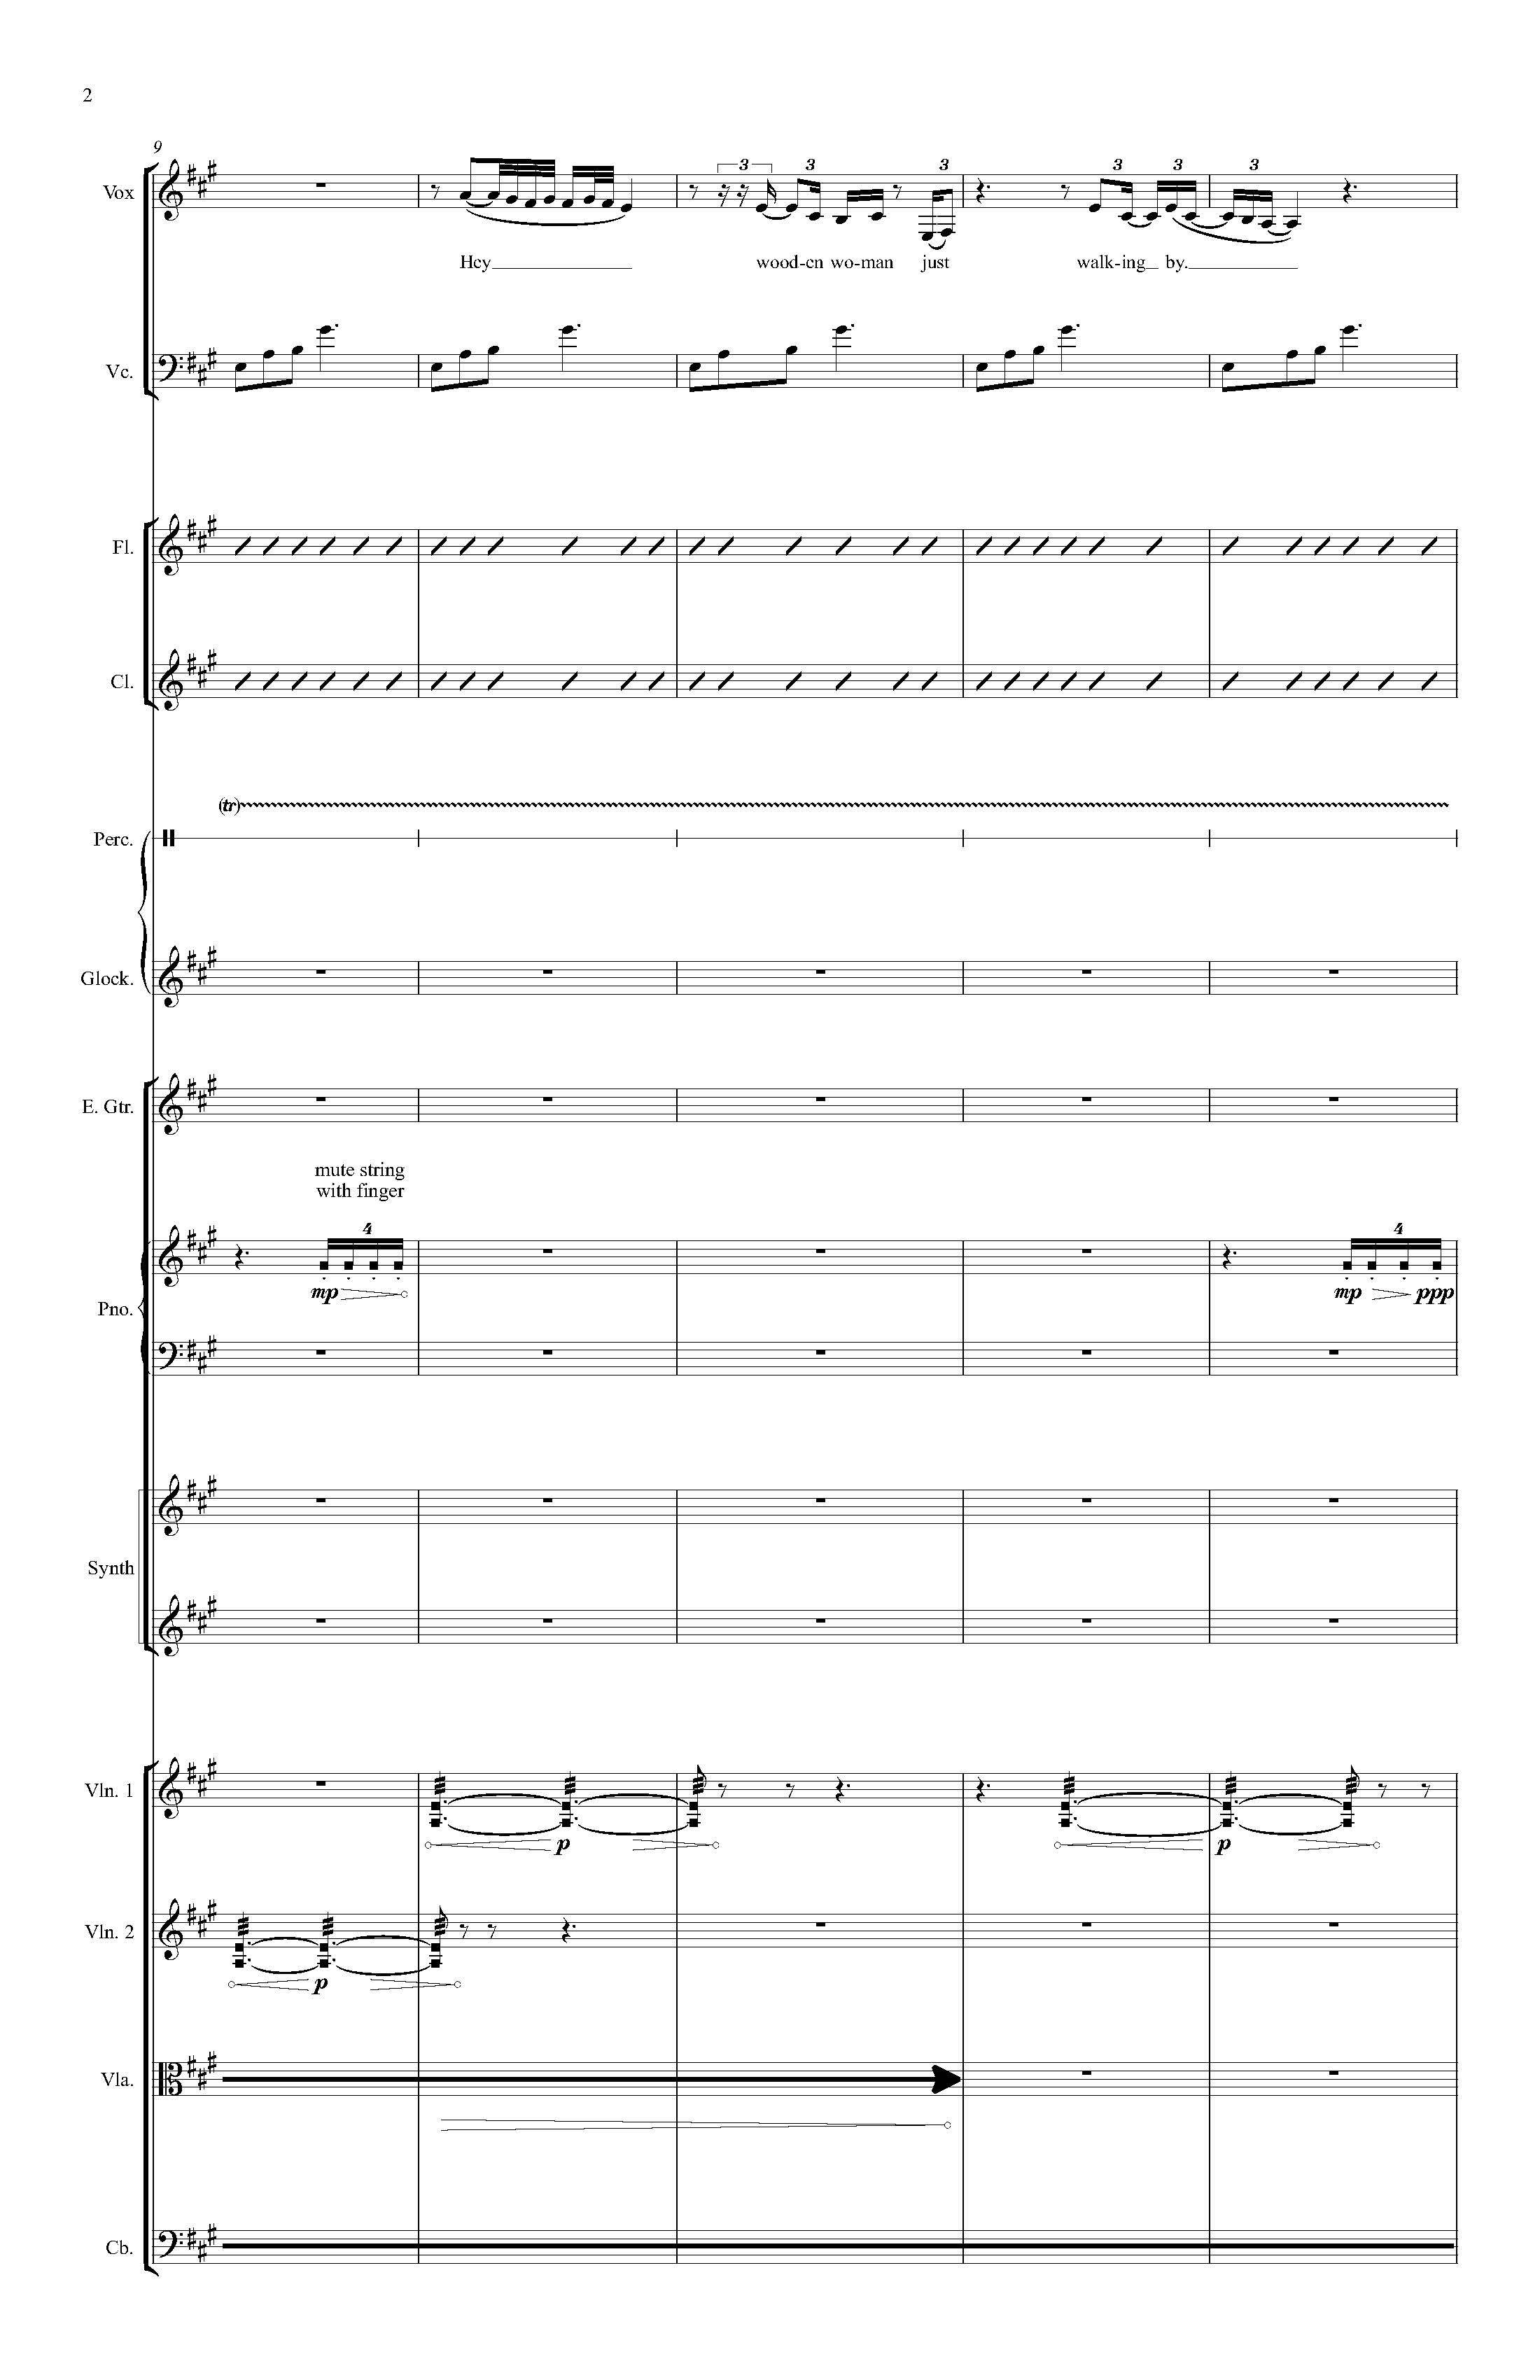 Wooden Woman - Complete Score_Page_08.jpg